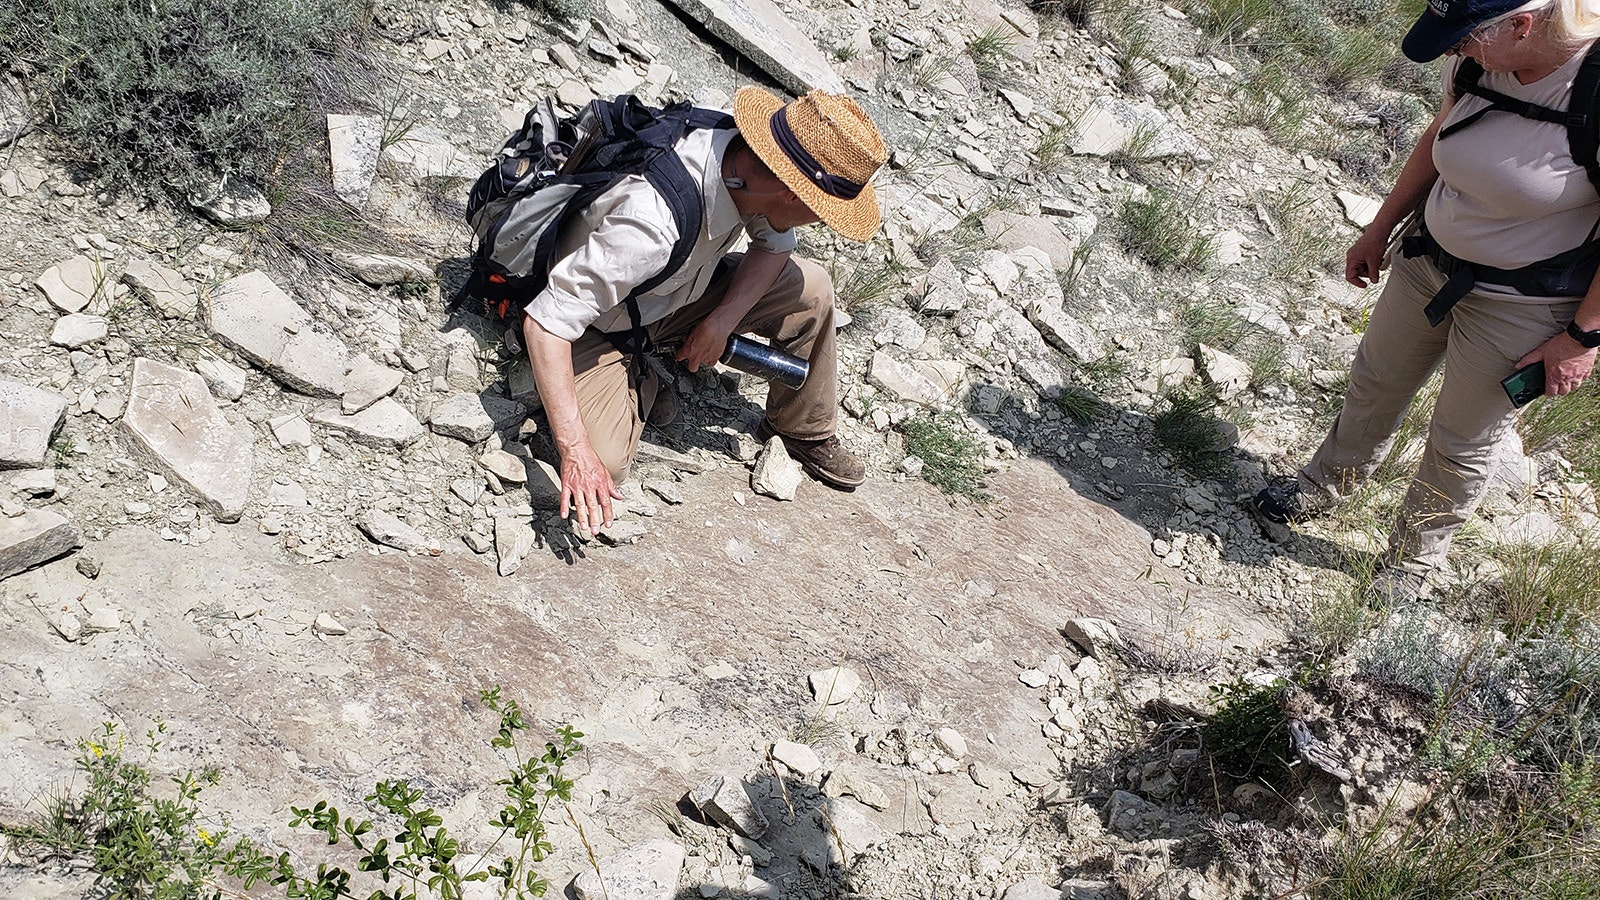 Bill Matteson explains a site where some dinosaur tracks have been preserved.